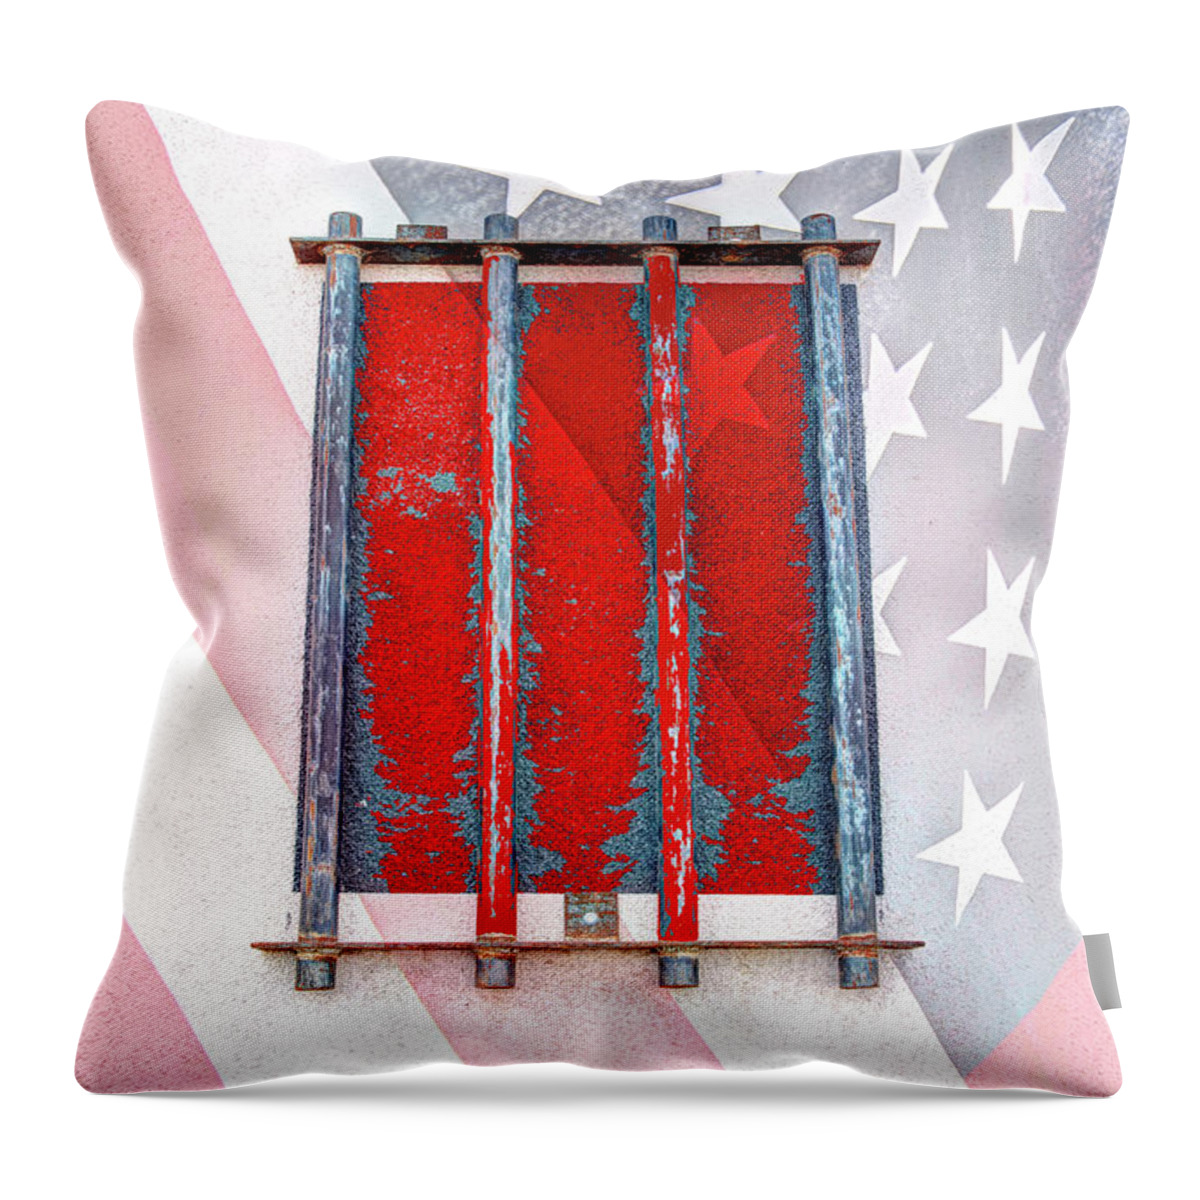 A Troubled Country Throw Pillow featuring the photograph A Troubled Country by Kathy Paynter